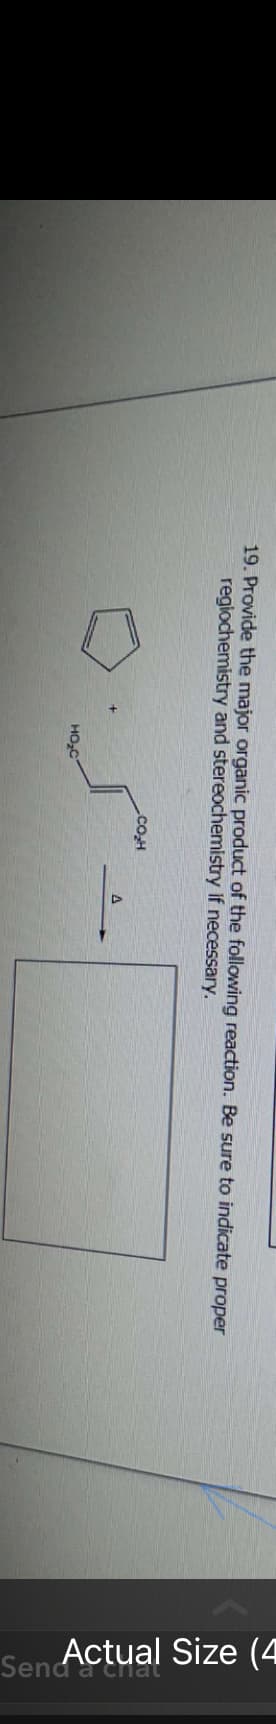 19. Provide the major organic product of the following reaction. Be sure to indicate proper
regiochemistry and stereochemistry if necessary.
HO₂C
CO₂H
A
Sen Actual Size (4